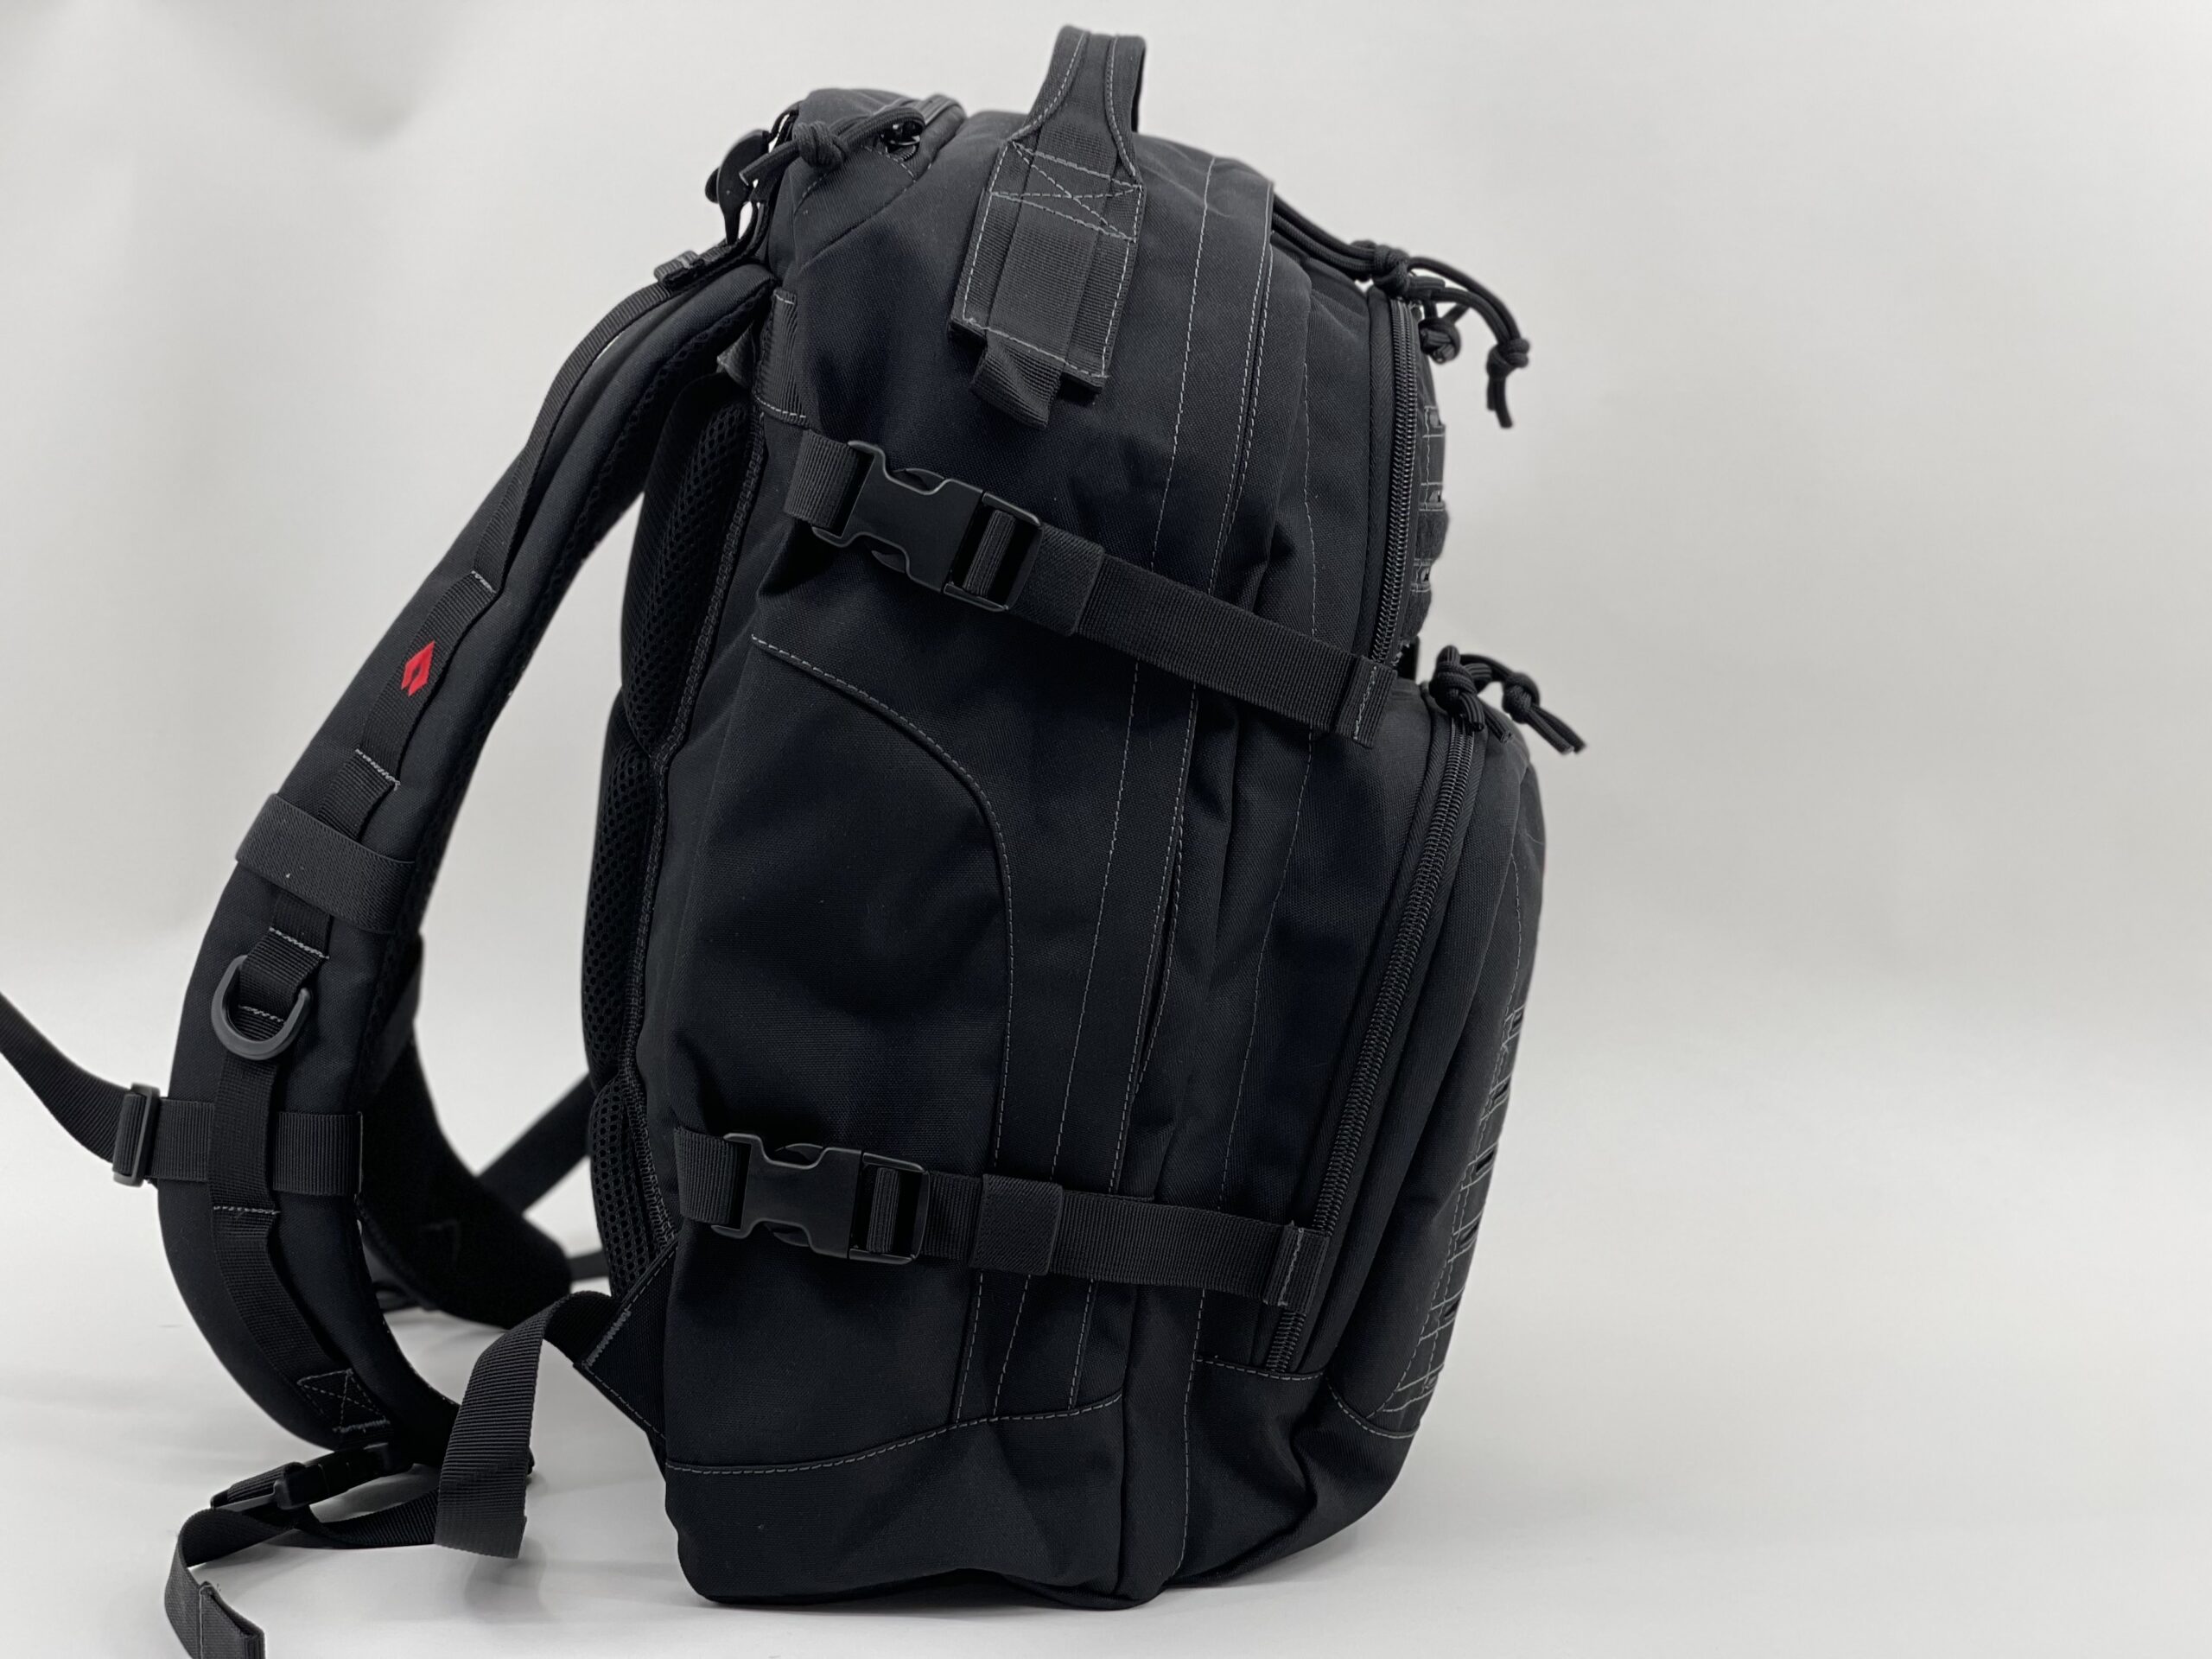 SPEAR 3 DAY BACKPACK -BLACK | Advance Warrior Solutions